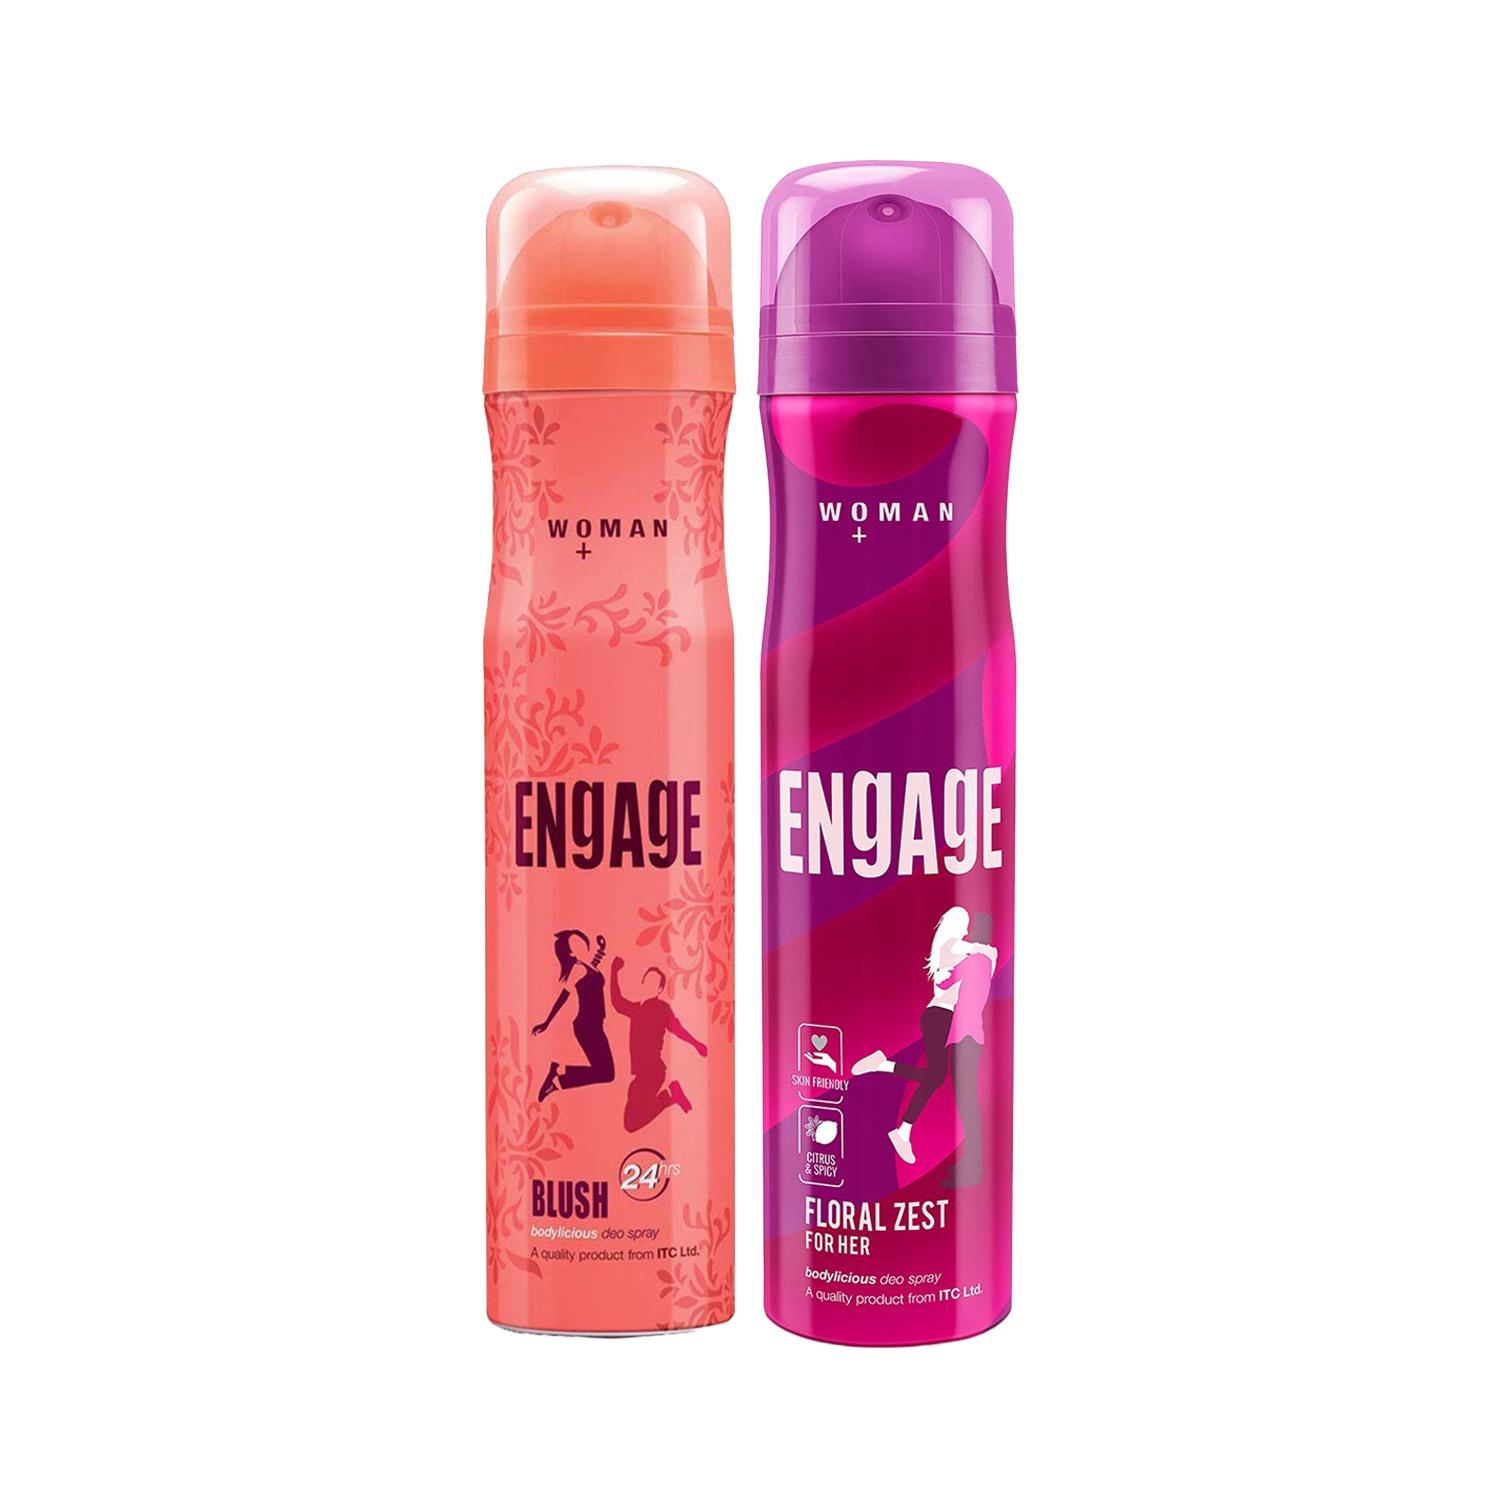 Engage | Engage Blush & Floral Zest Deodorant Spray For Women Combo